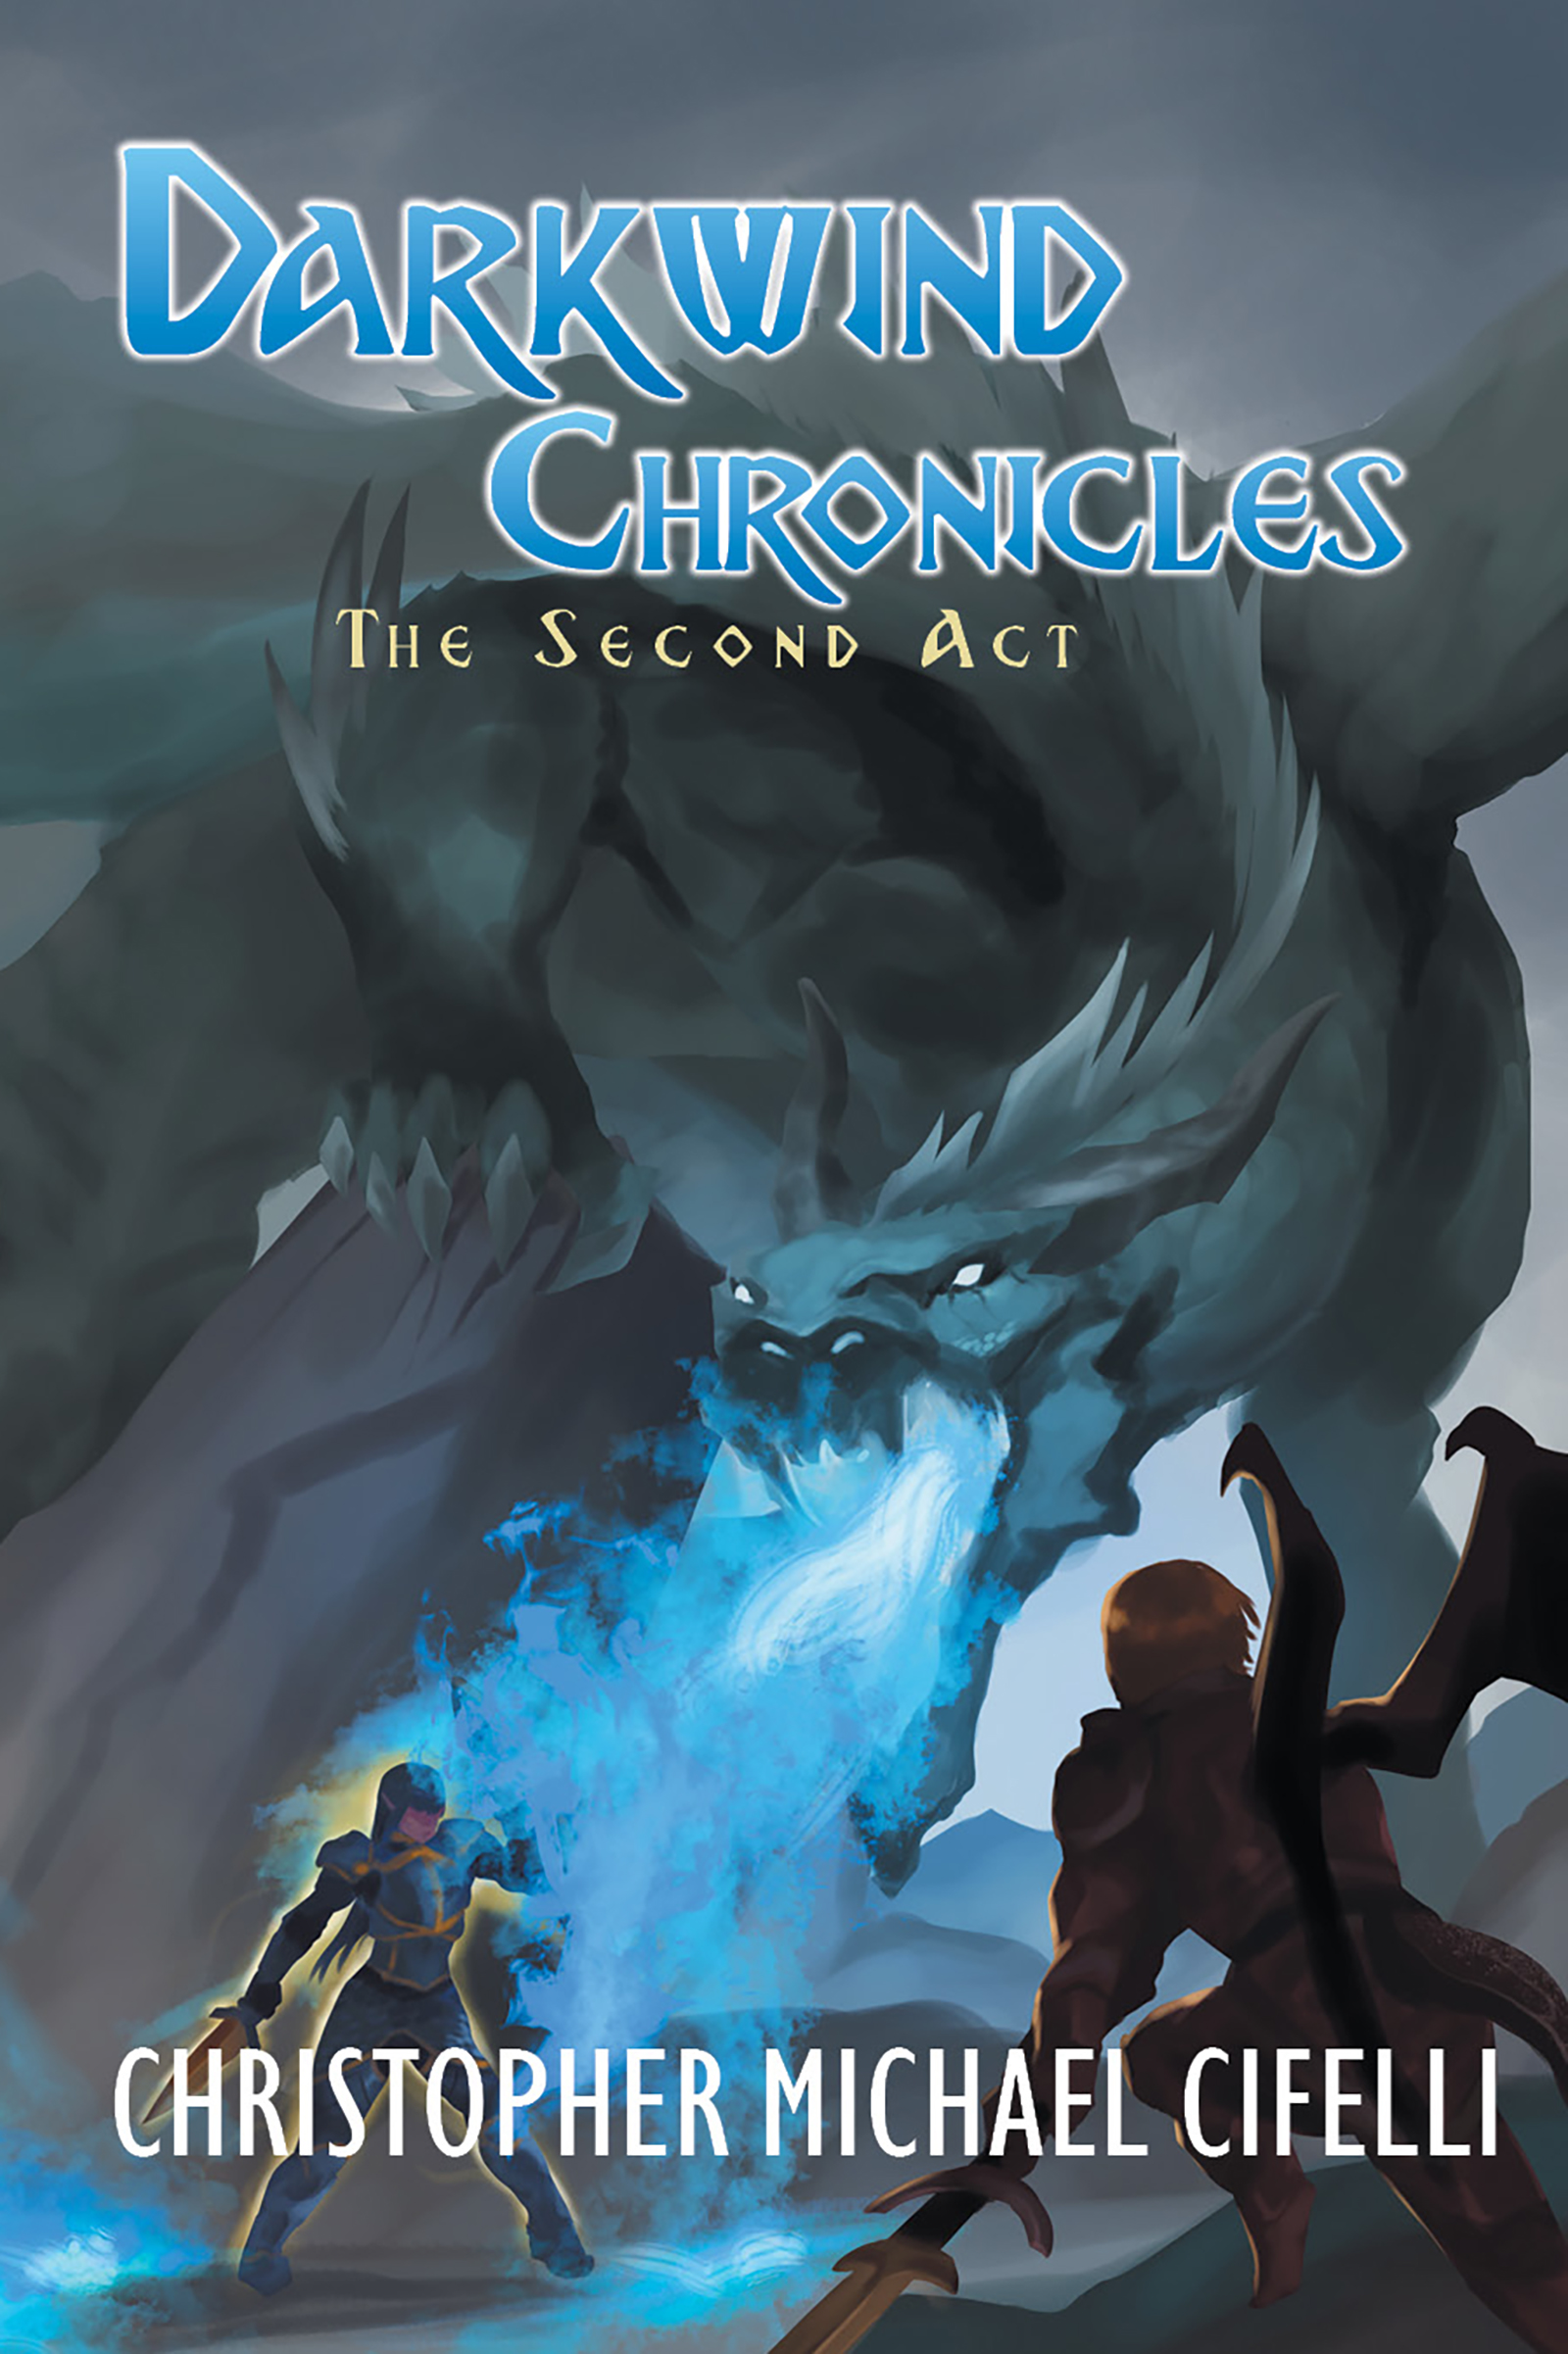 The Hollywood Book Reviews on Darkwind Chronicles: The Second Act